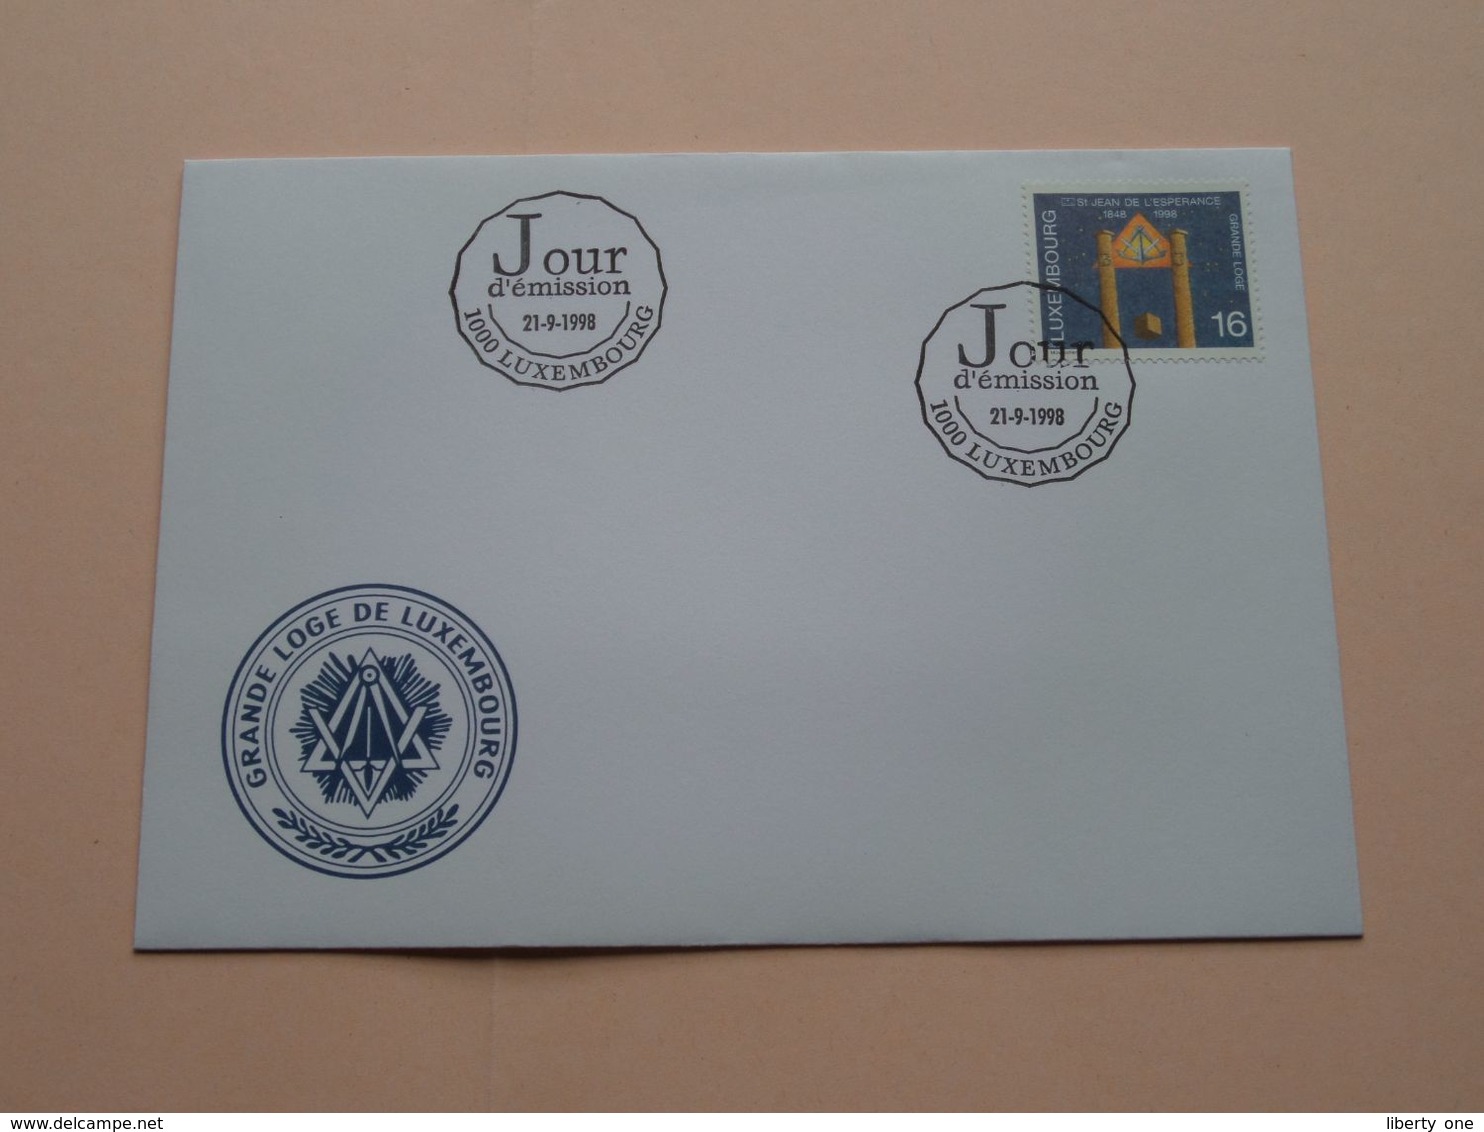 GRANDE LOGE De LUXEMBOURG Luxembourg 1998 ( Enveloppe ( FDC P & T 10 / 1998 ) Omslag > Voir Photo Svp ) Luxembourg ! - FDC